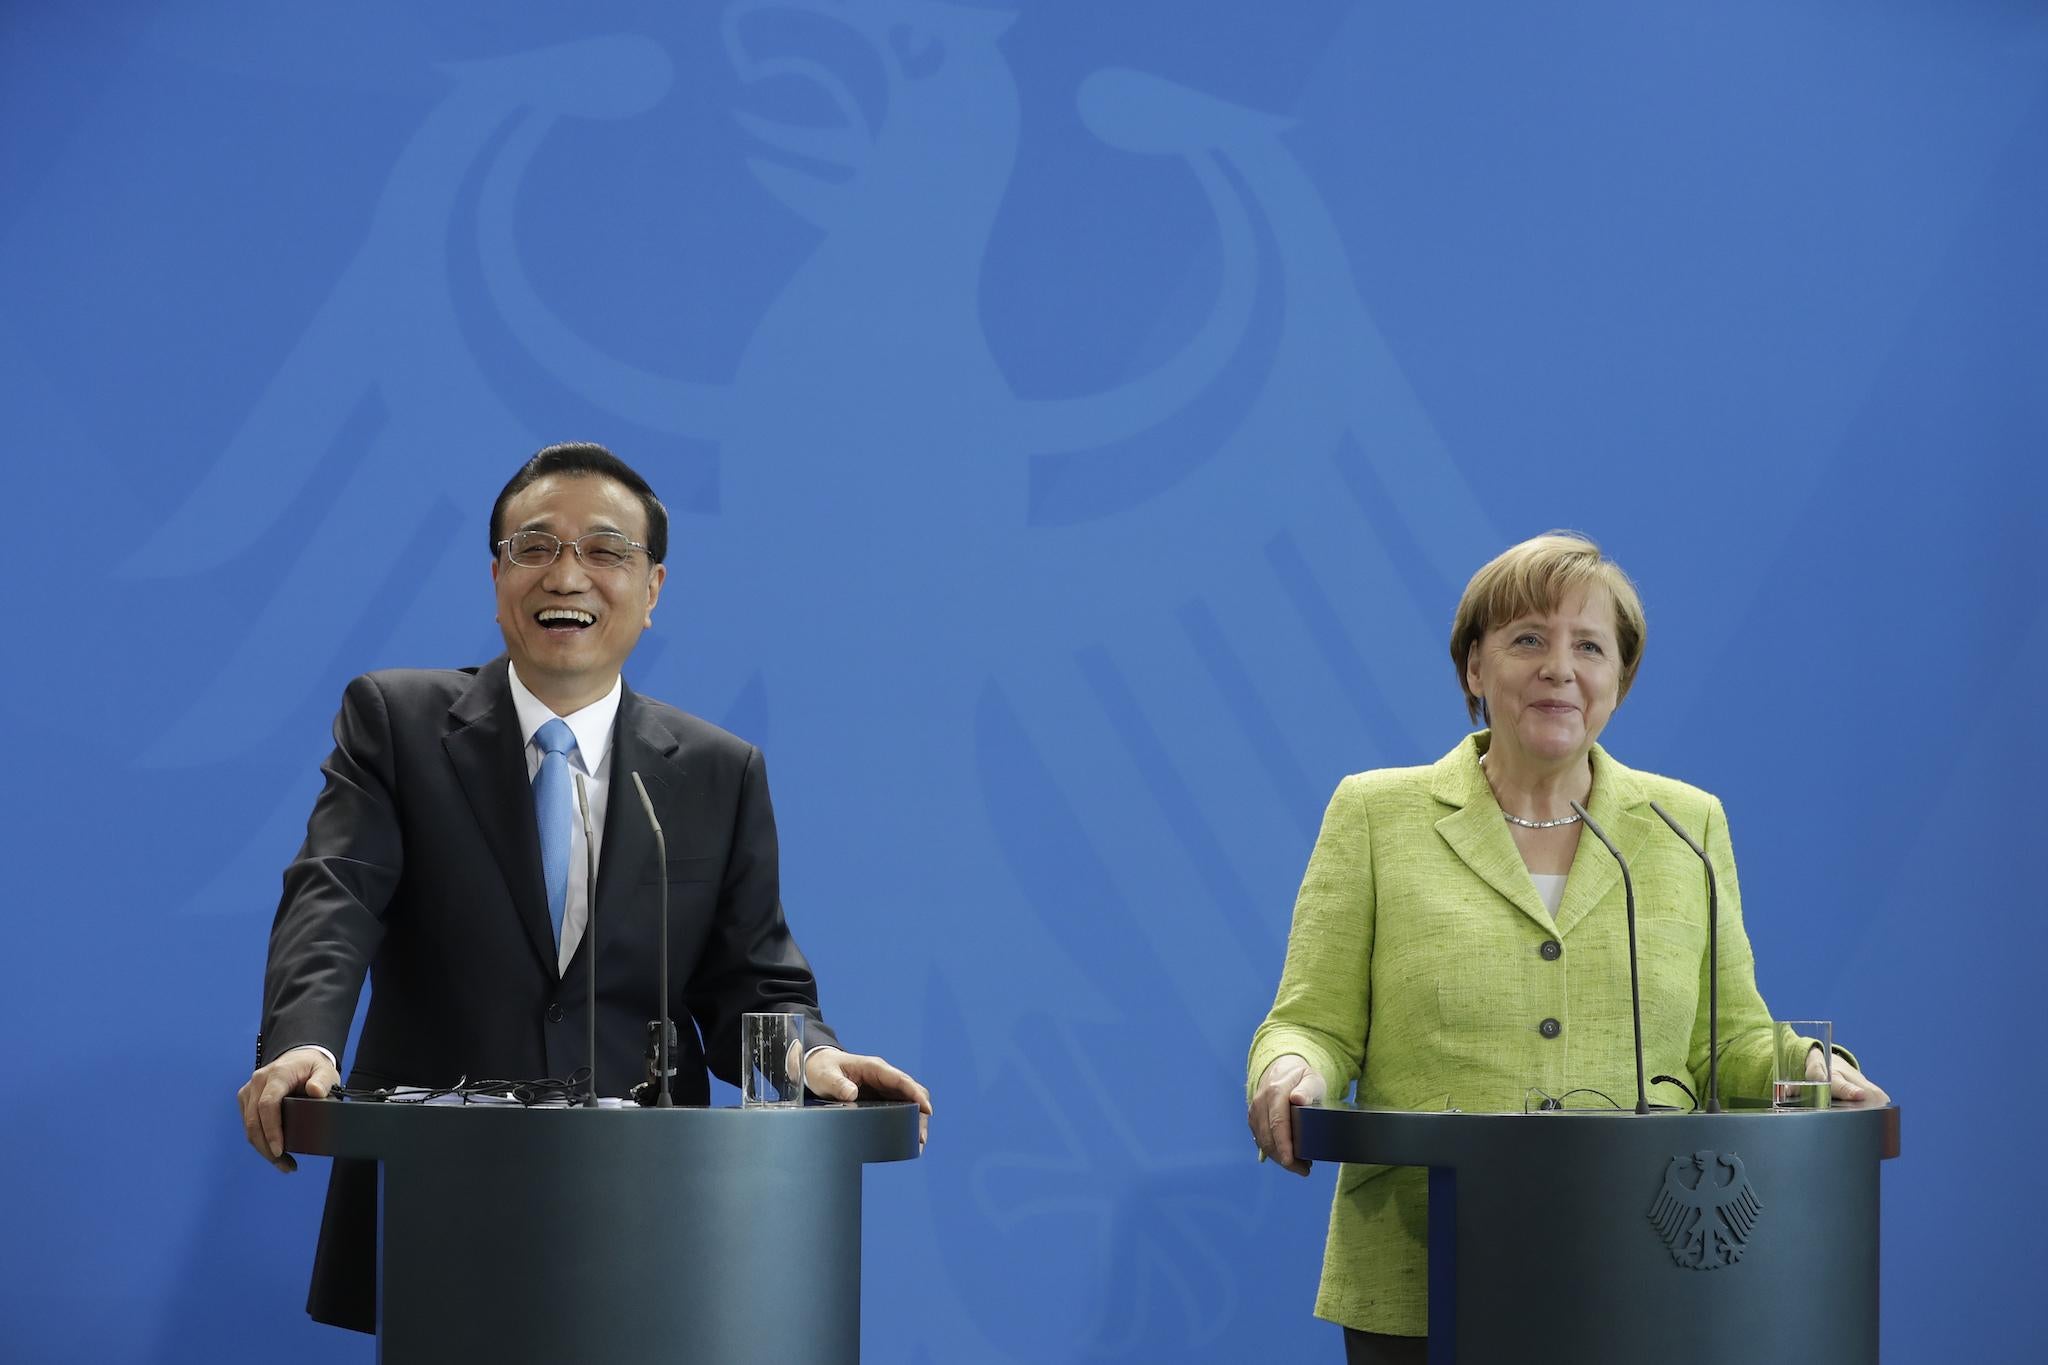 German Chancellor Angela Merkel and China's Premier Li Keqiang address the media during a joint press conference